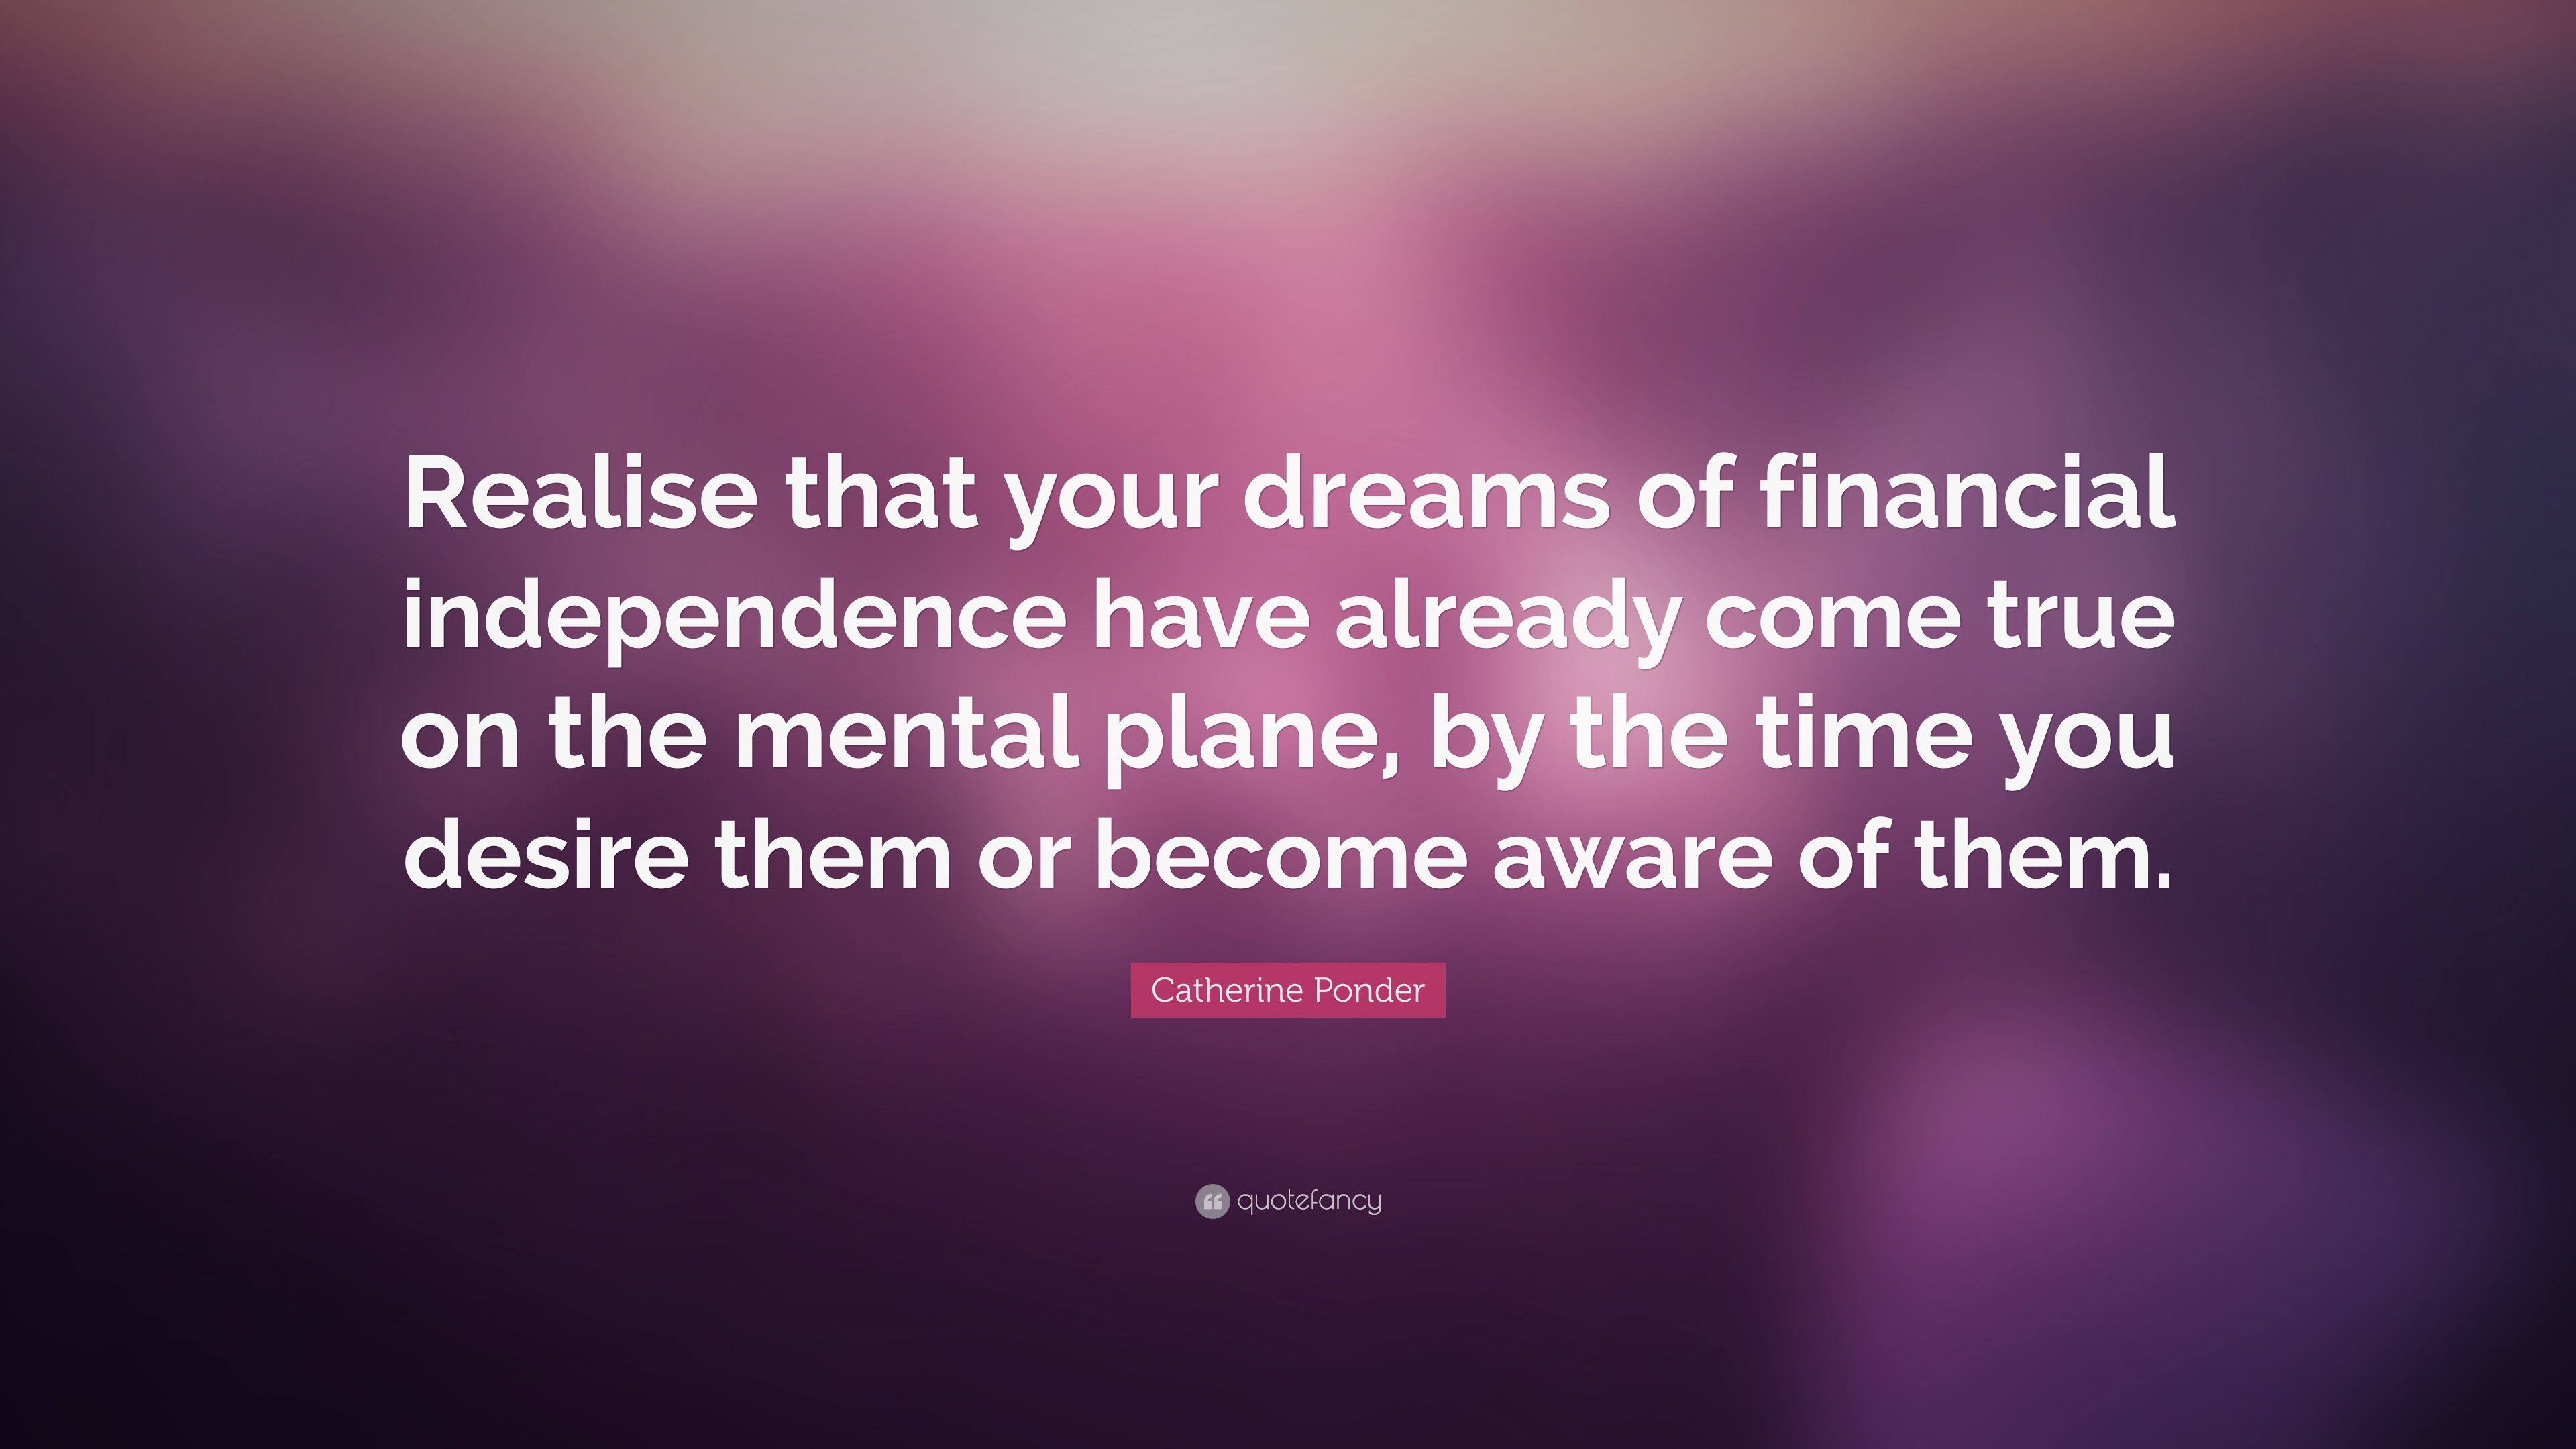 Catherine Ponder Quote Realise That Your Dreams Of Financial Independence Have Already Come True On The Mental Plane By The Time You Desire Th